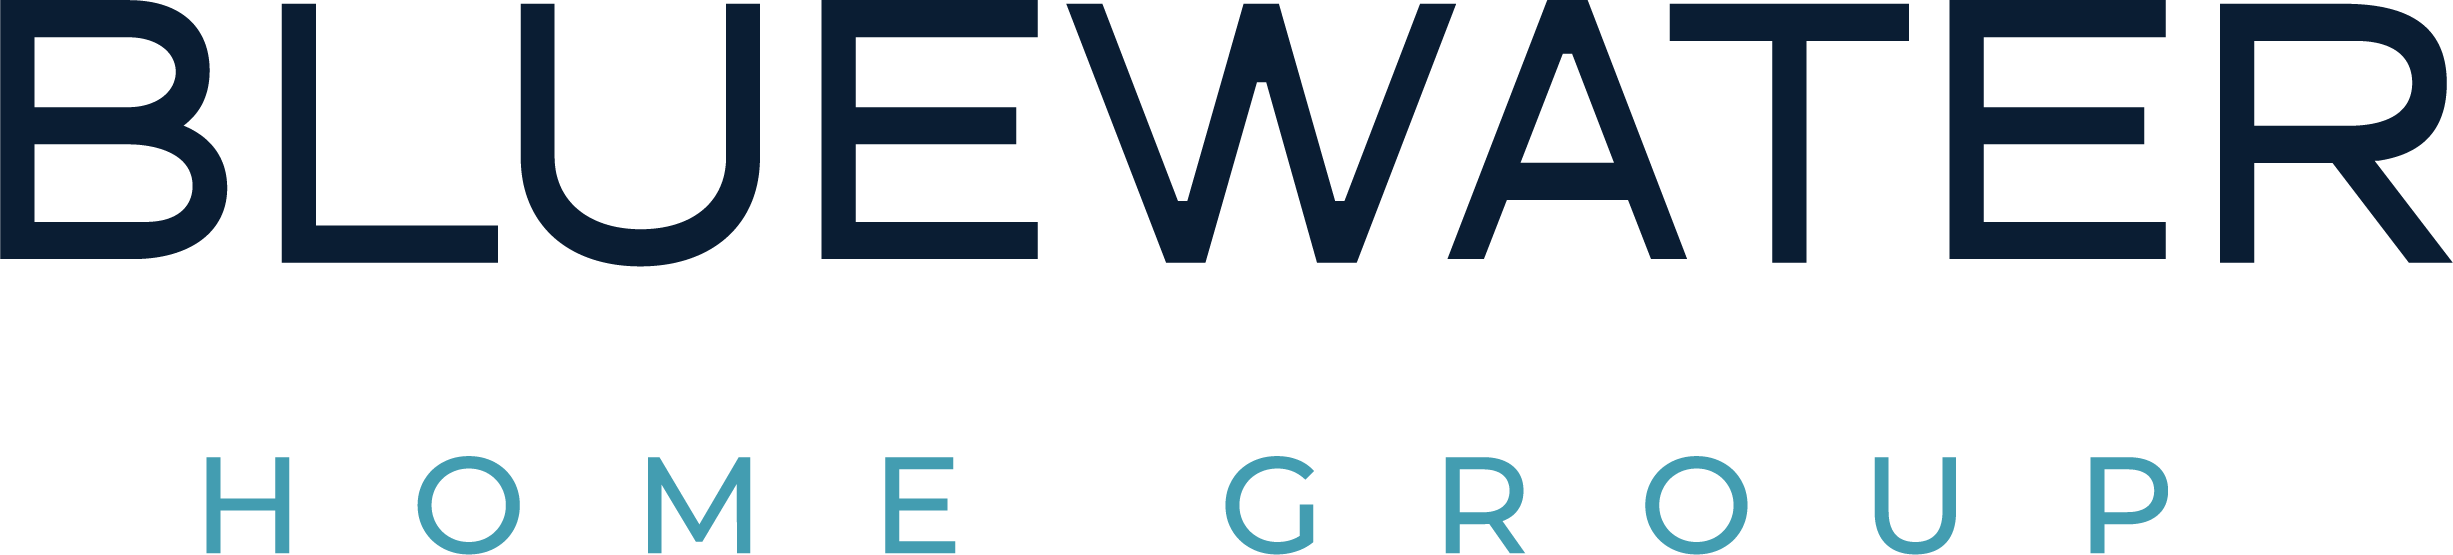 Bluewater Home Group